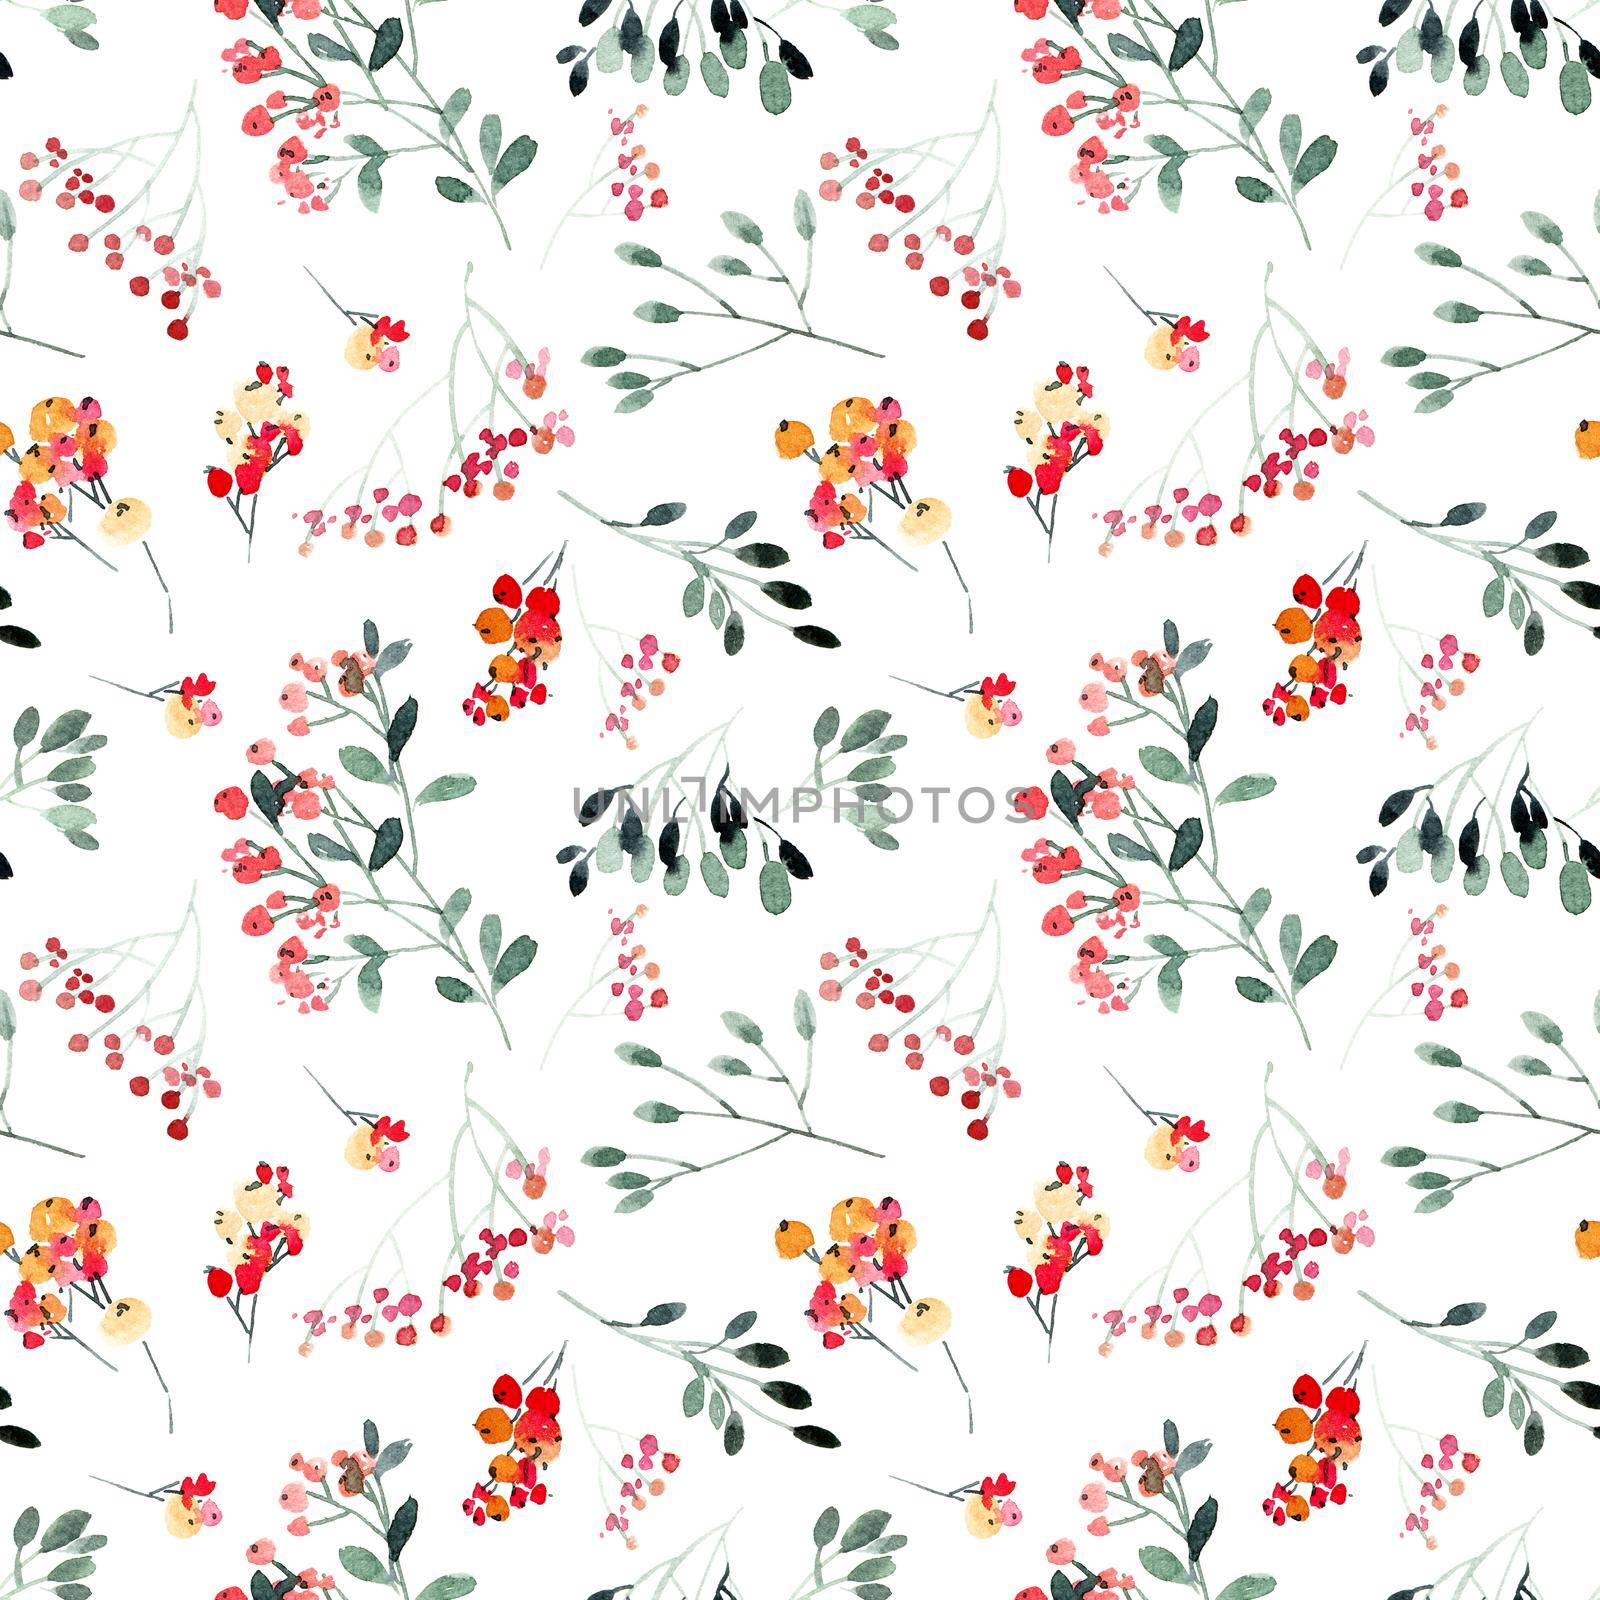 Watercolor leaves and flowers twigs on white background - decorative organic seamless pattern.